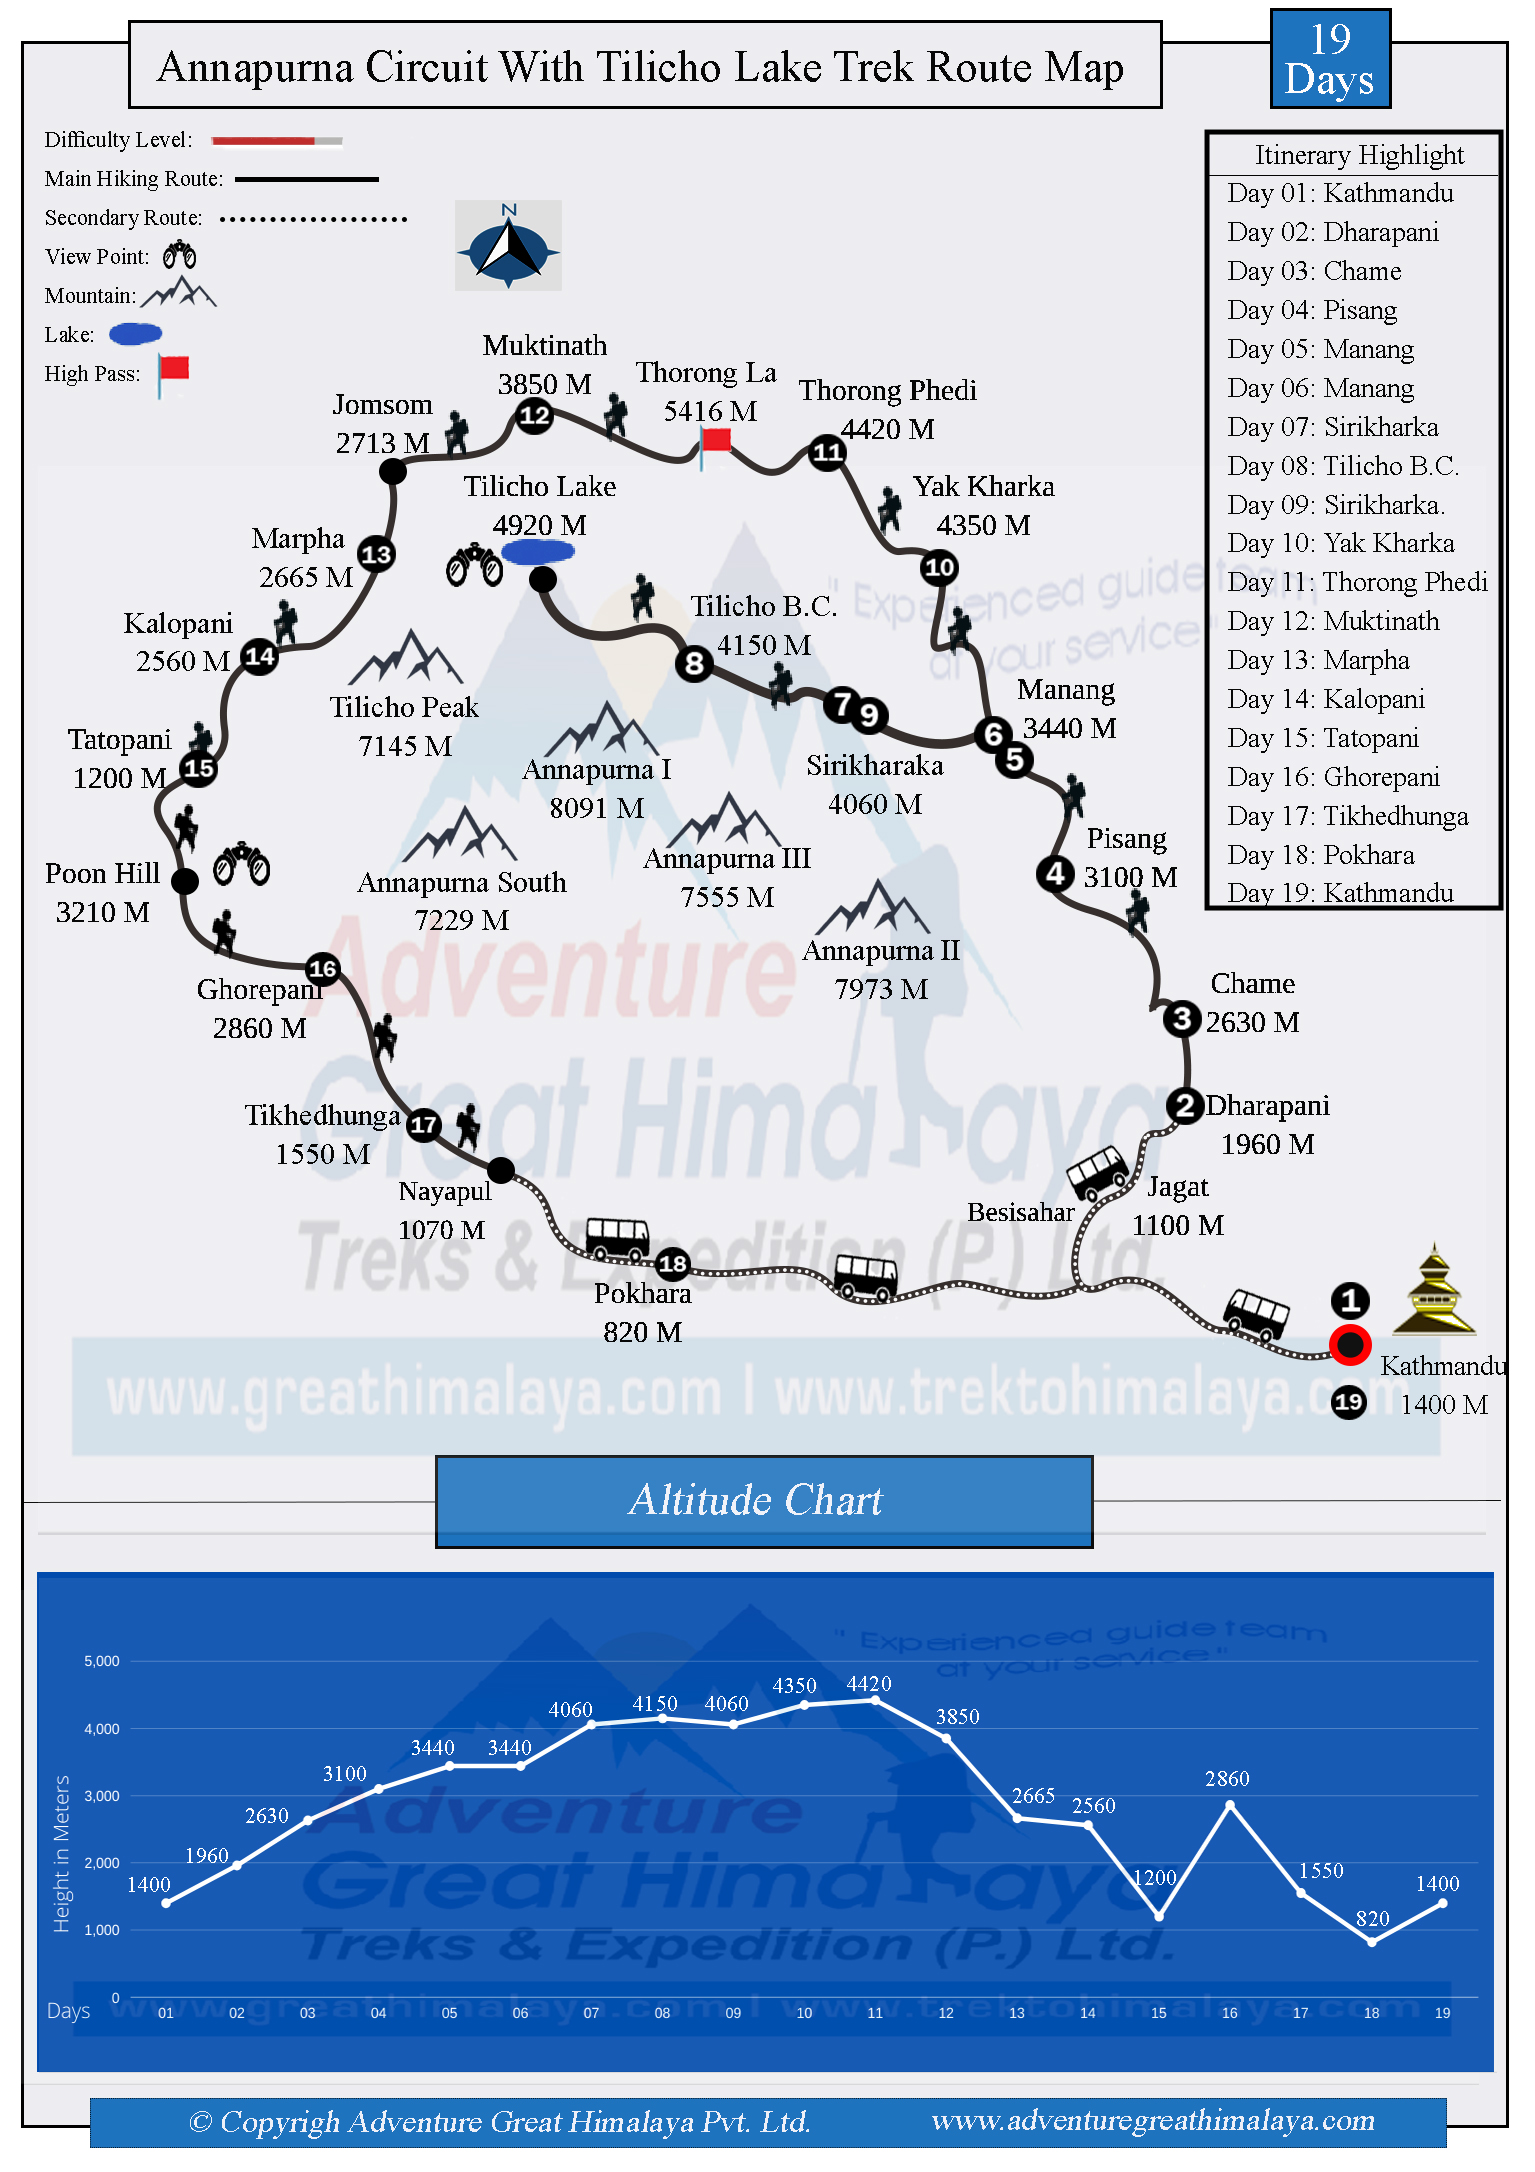 Annapurna Circuit with Tilicho Lake Route Map